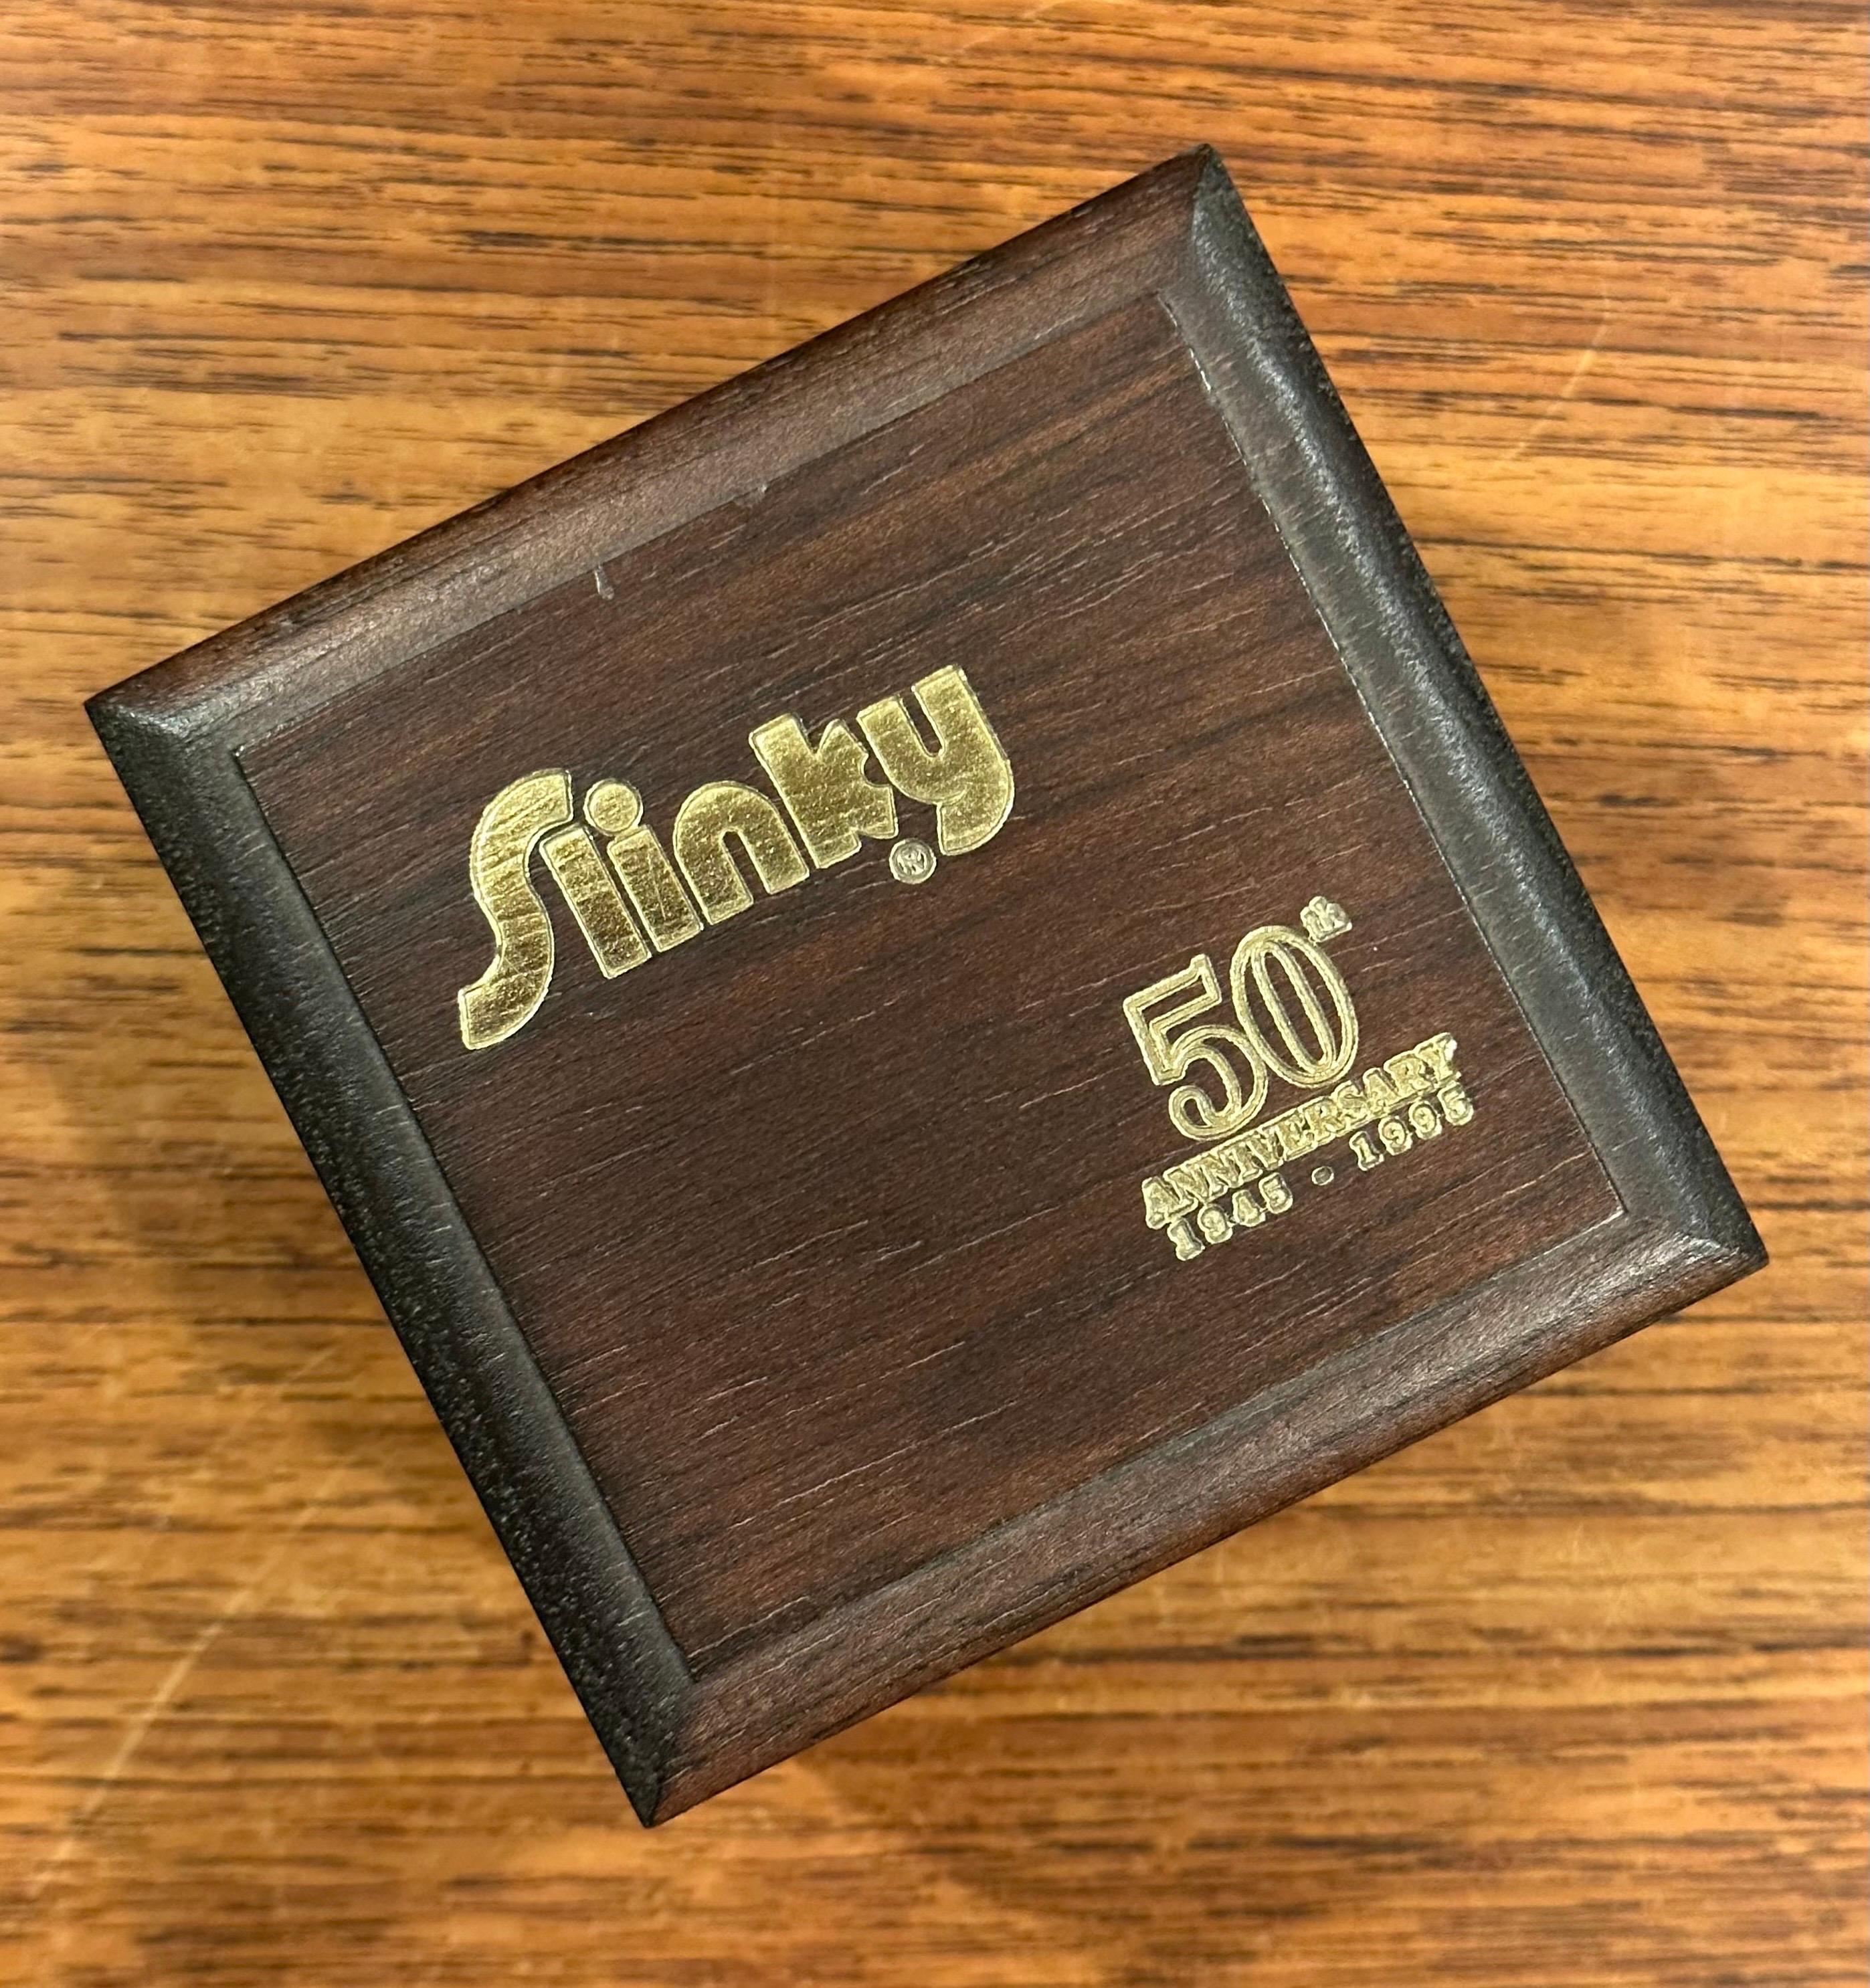 American 50th Anniversary Gold-Plated Slinky Toy in Wood Box For Sale